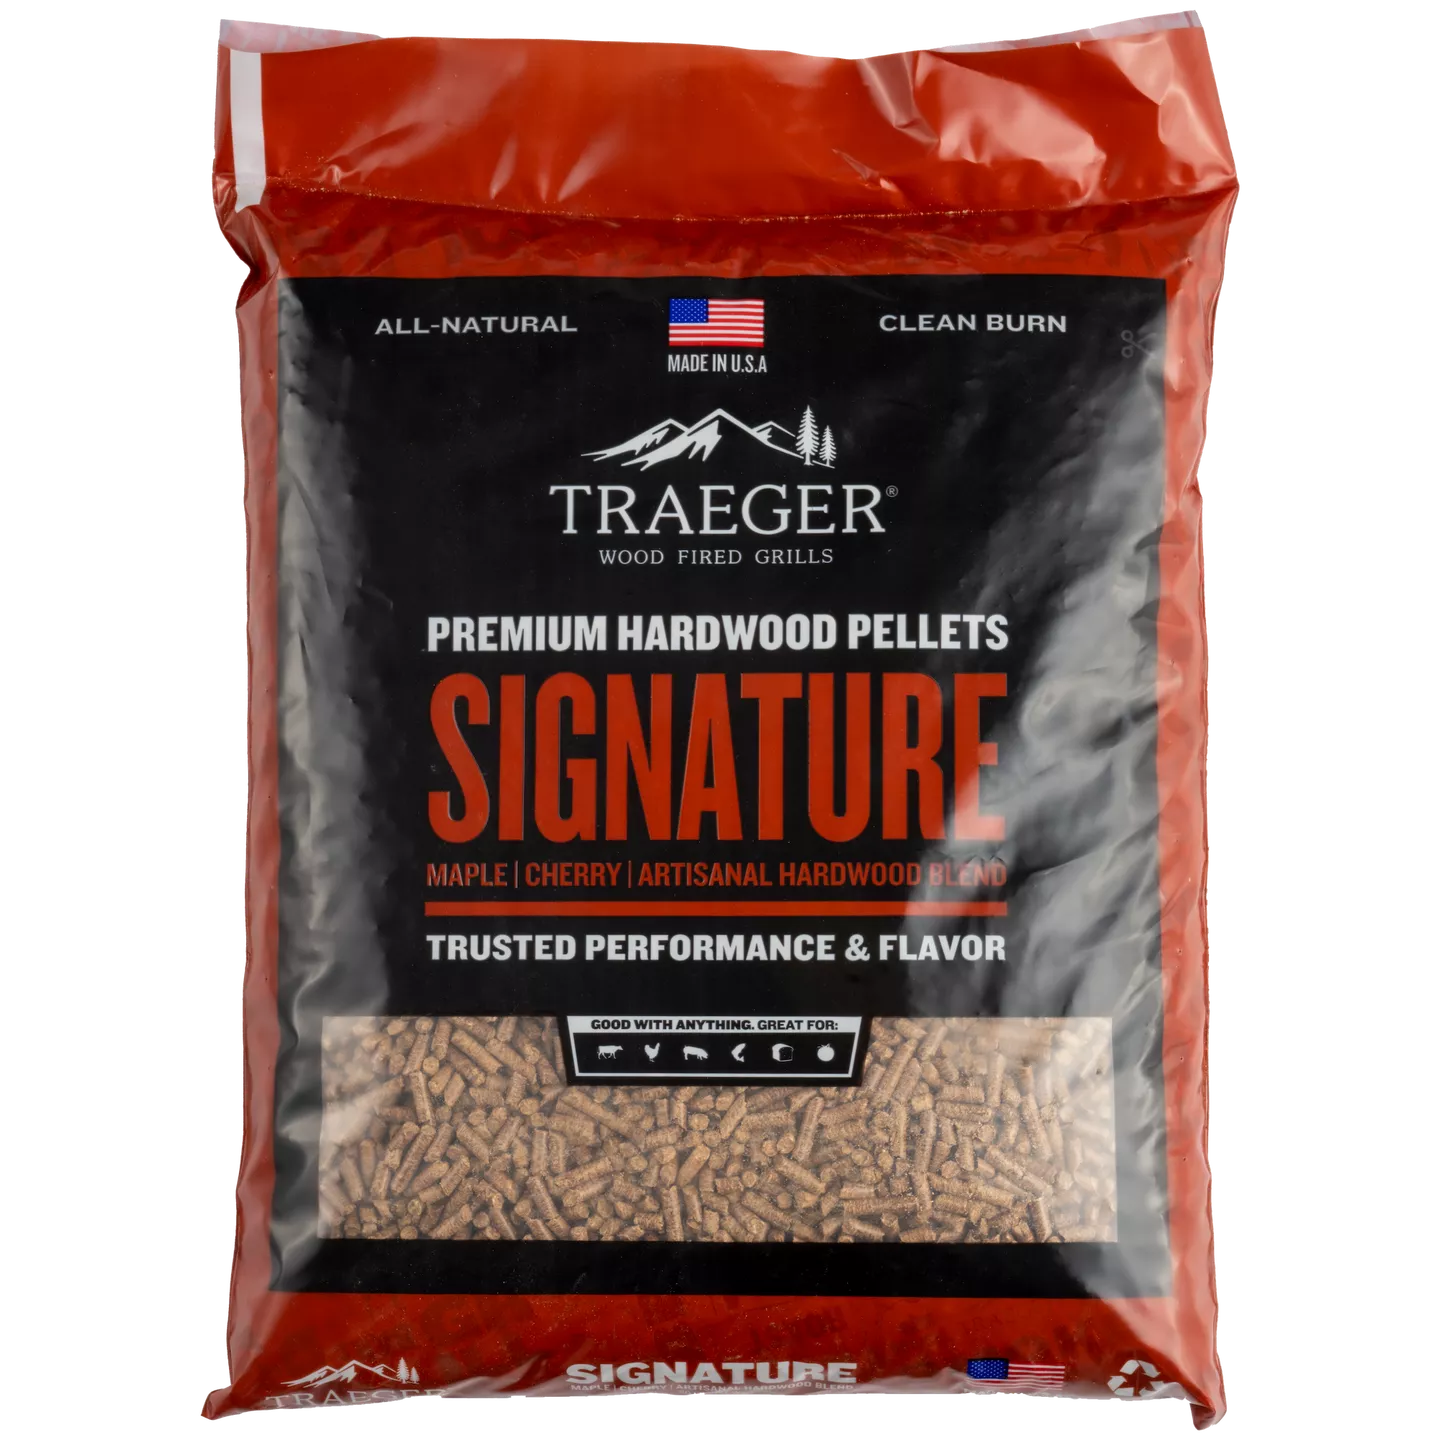 /assets/images/products/product-images/DASR1ZARDSWVP/6645083566108_traeger-new-signature-pellets-studio-front2 (1).webp